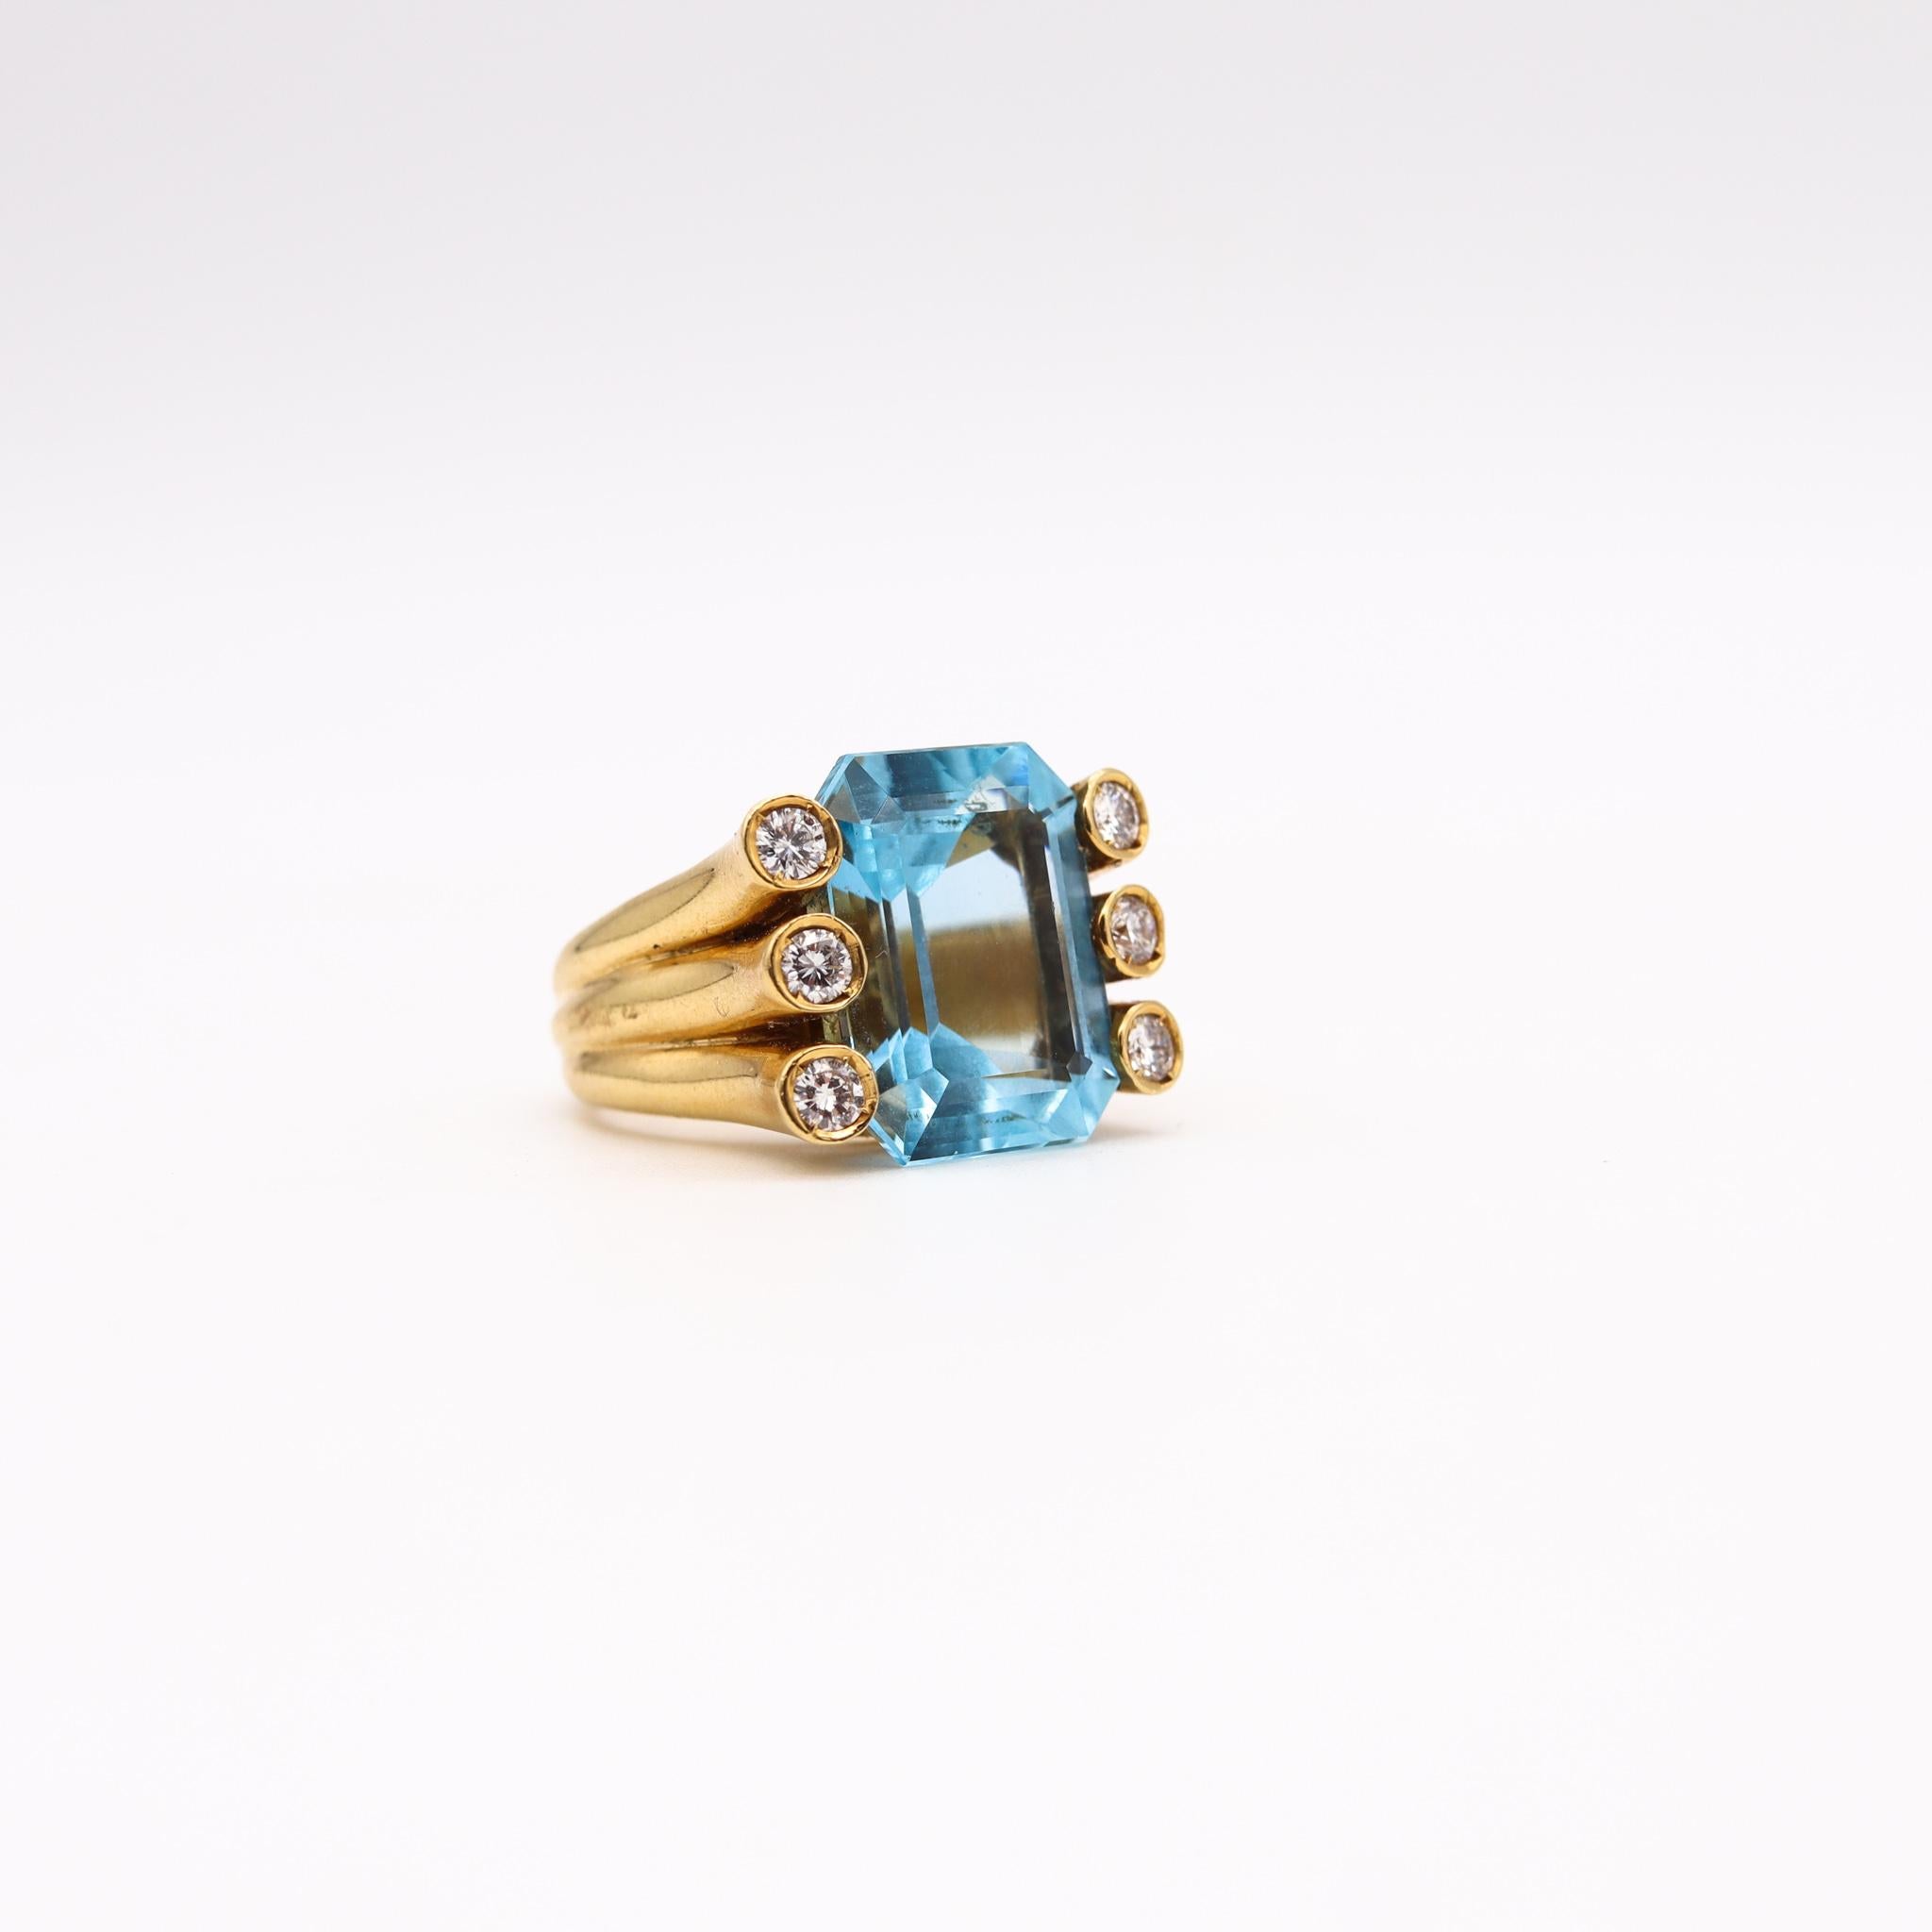 Women's Verdura Milan Cocktail Ring in 18kt Gold with 12.31 Cts in Aquamarine & Diamonds